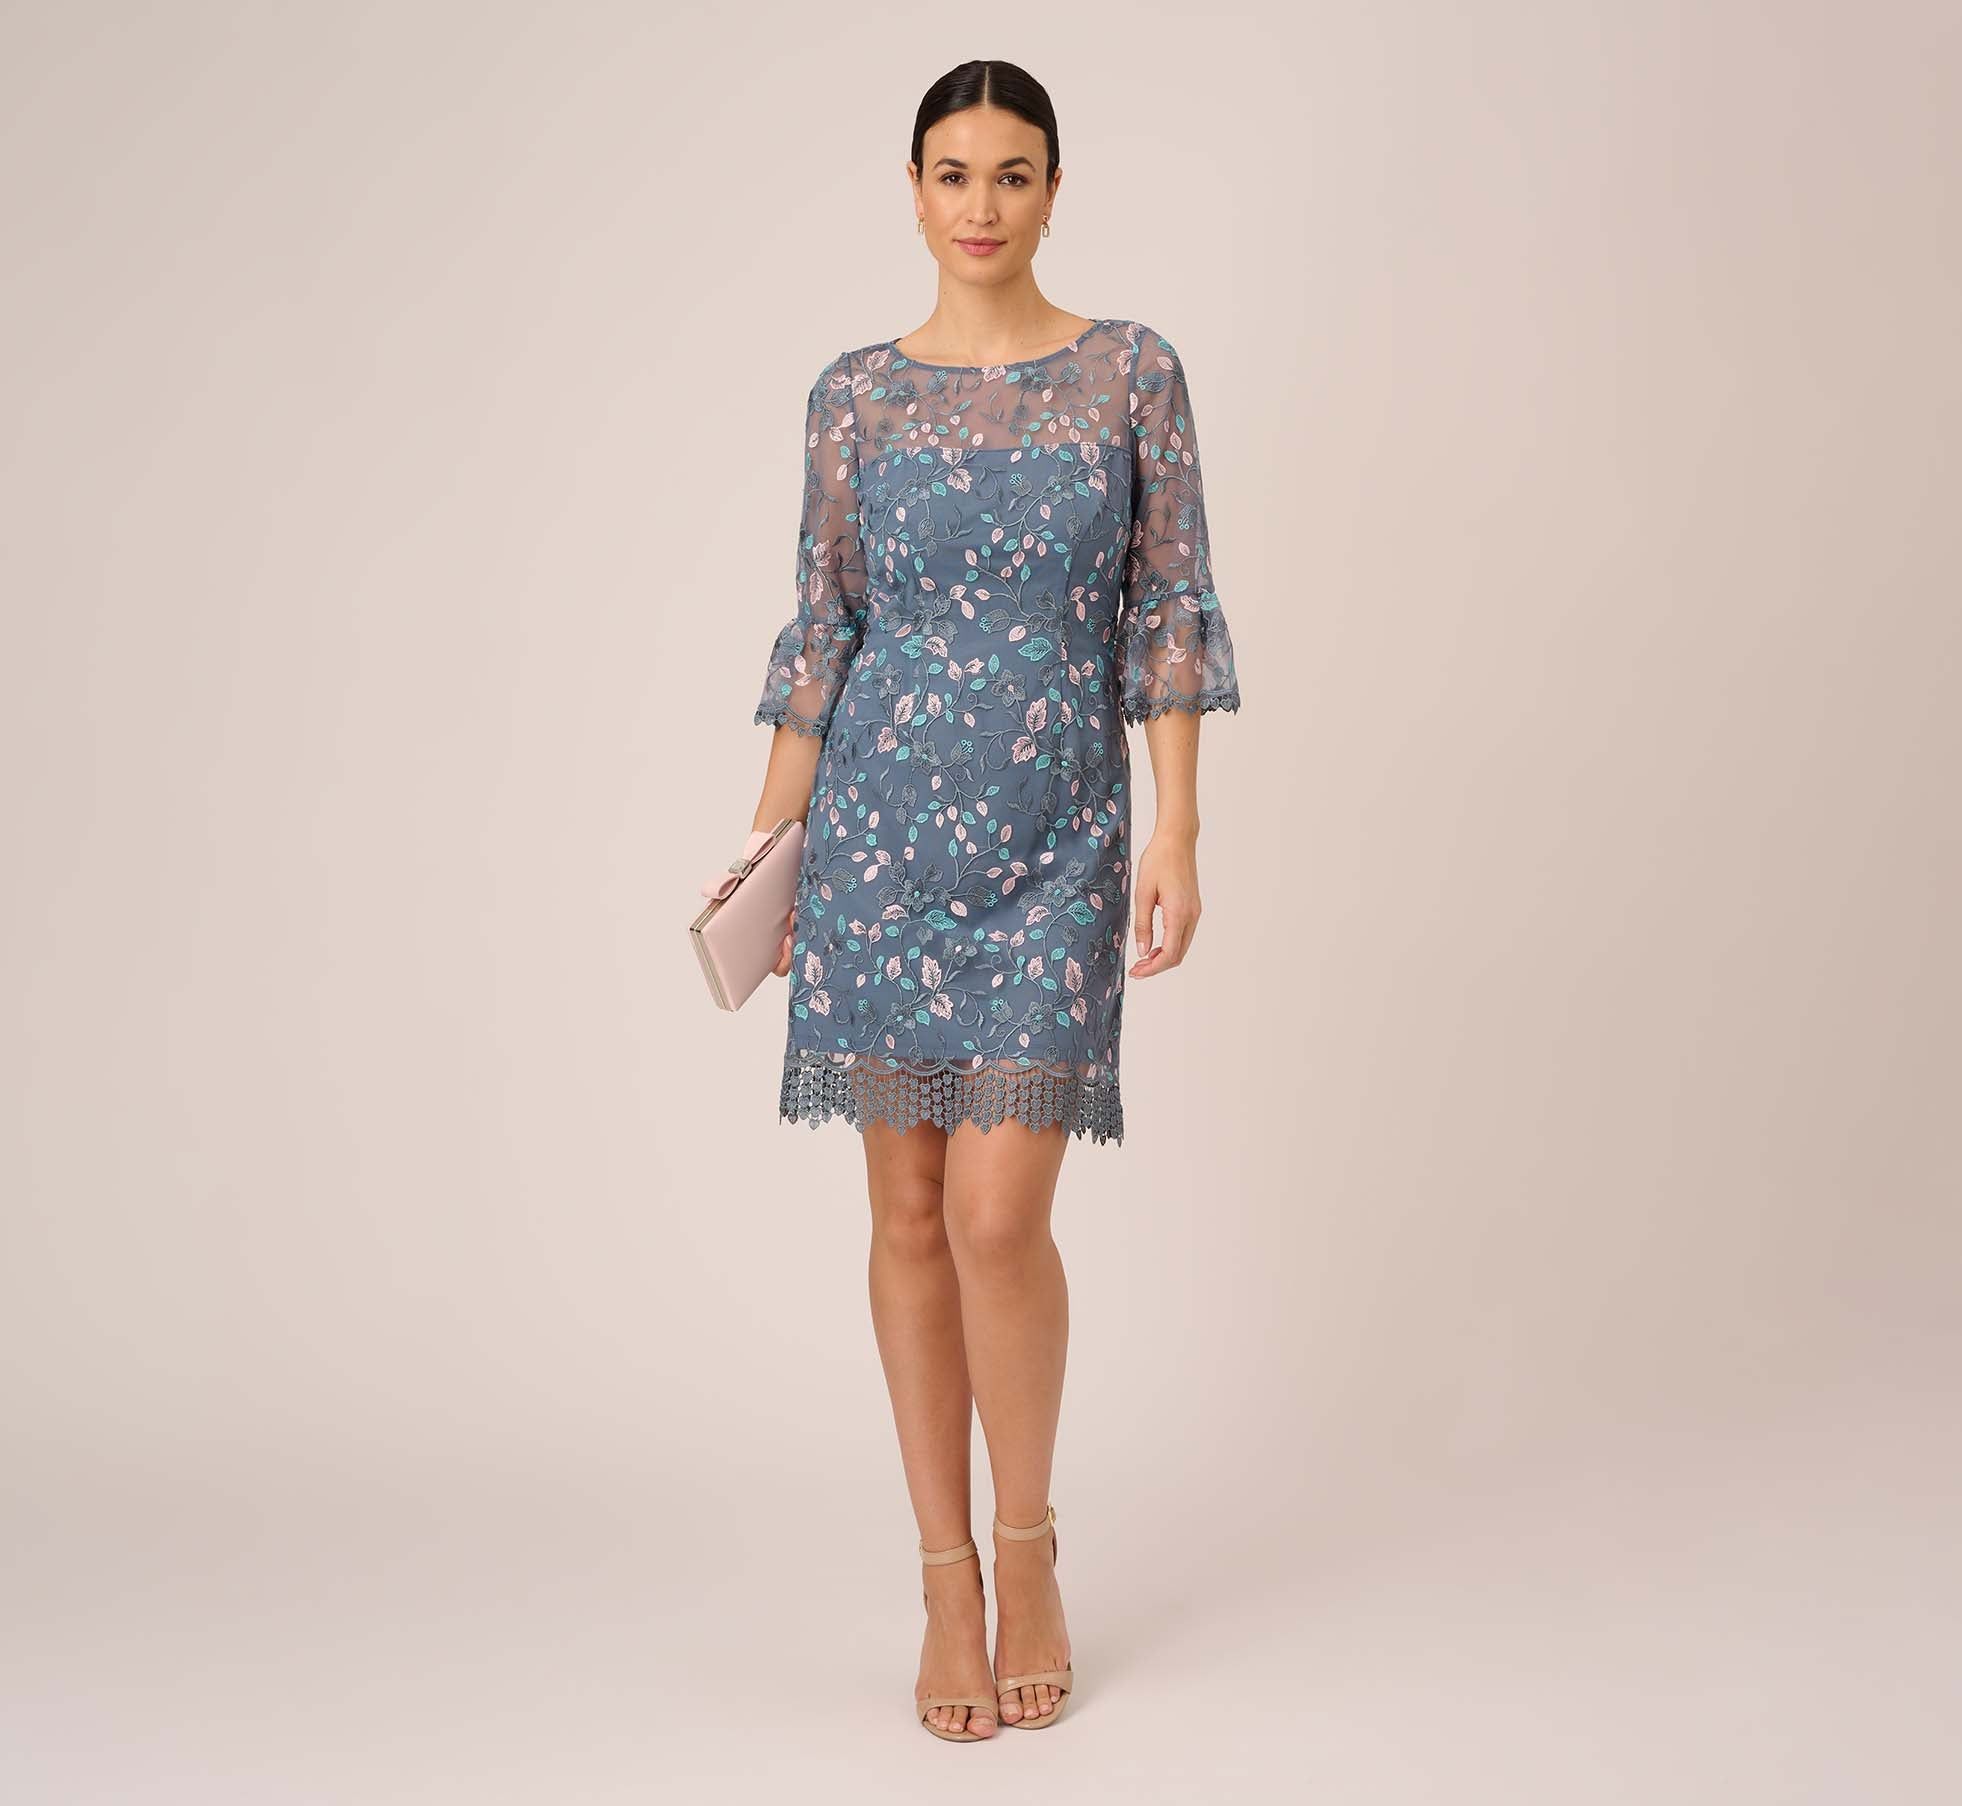 Floral Embroidered Short A-Line Dress With Cutout Back In Dusty Aqua | Adrianna Papell